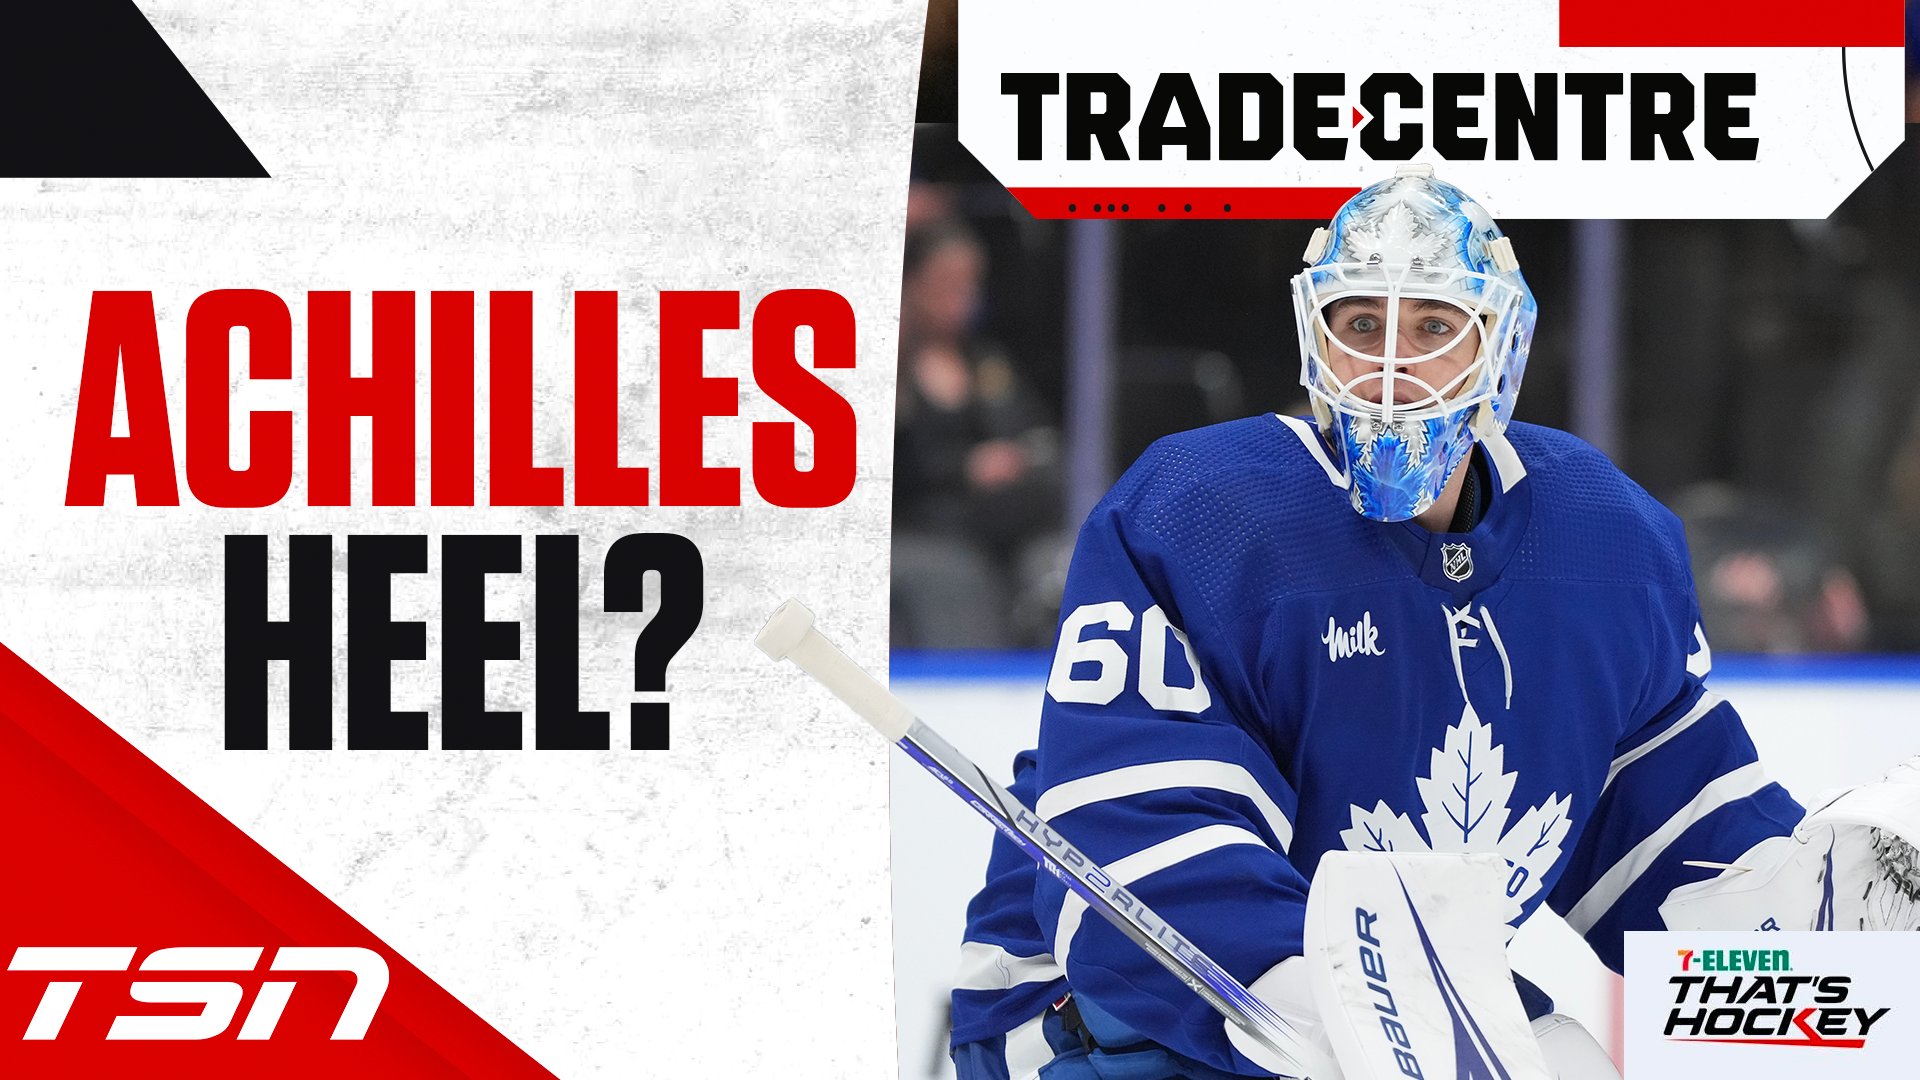 NHL Trade Deadline 2019: Trade tracker and analysis on deadline day deals -  The Hockey News